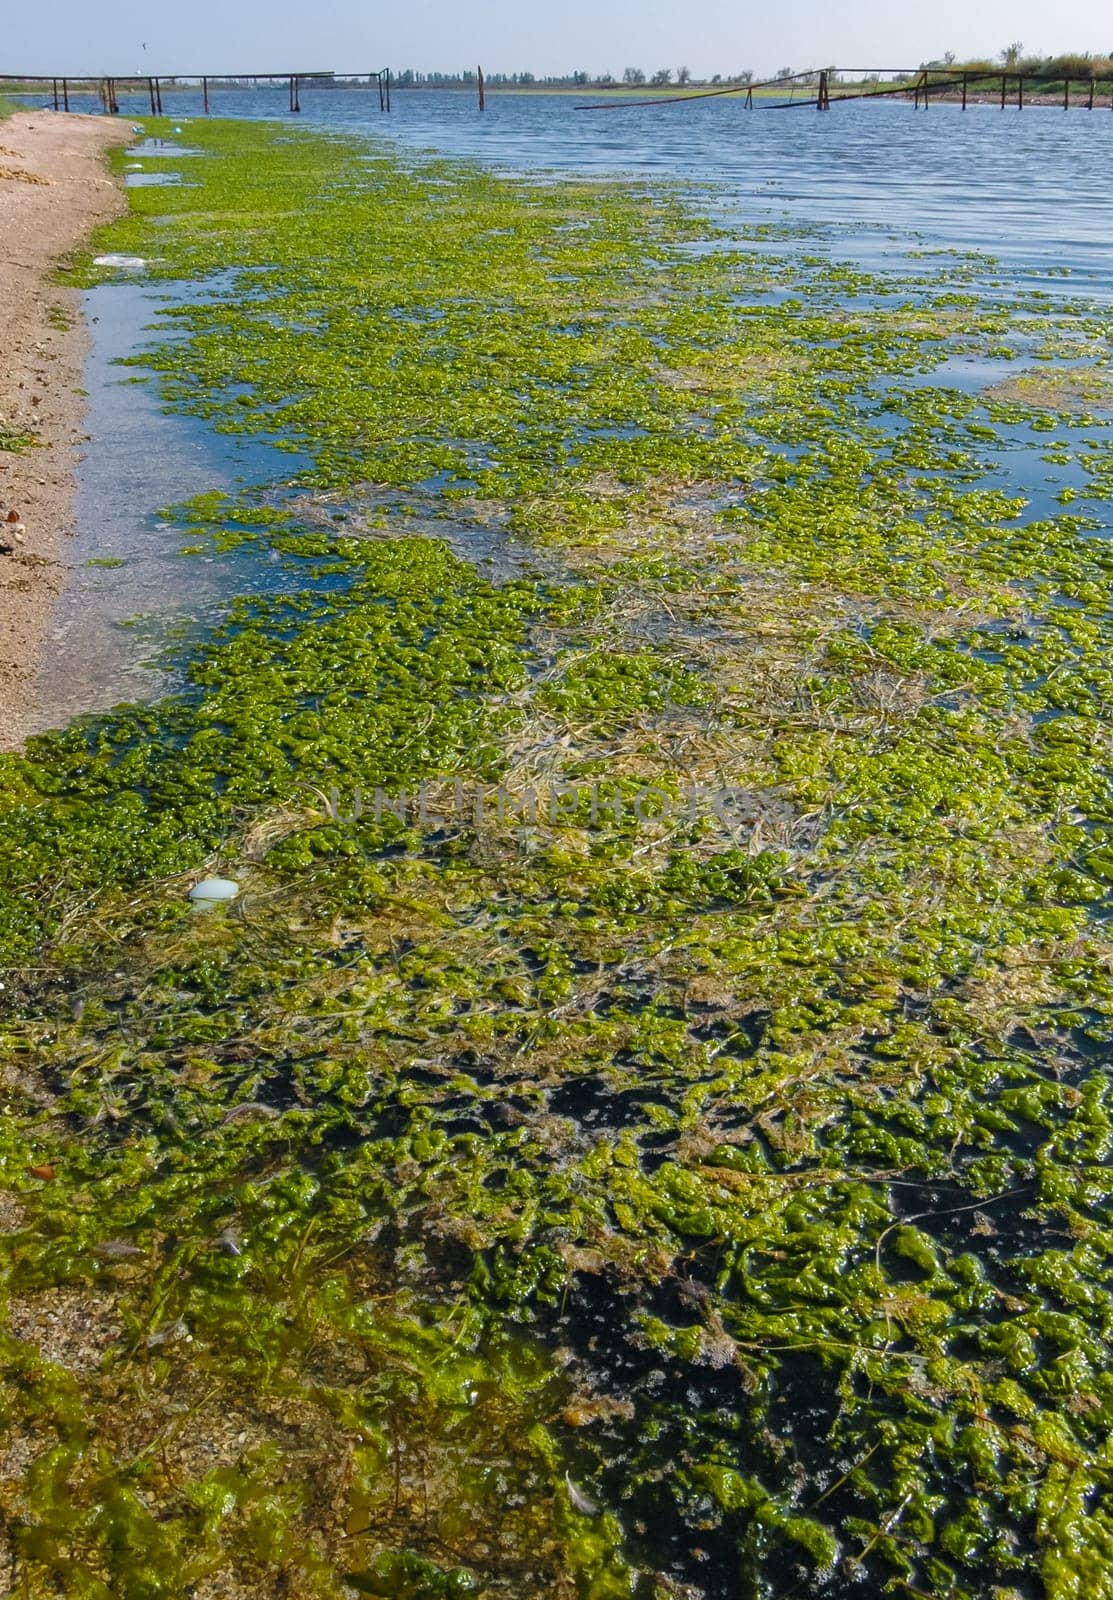 A large accumulation of green algae Ulva and Enteromorpha in a shallow estuary, eutrophication in the sea